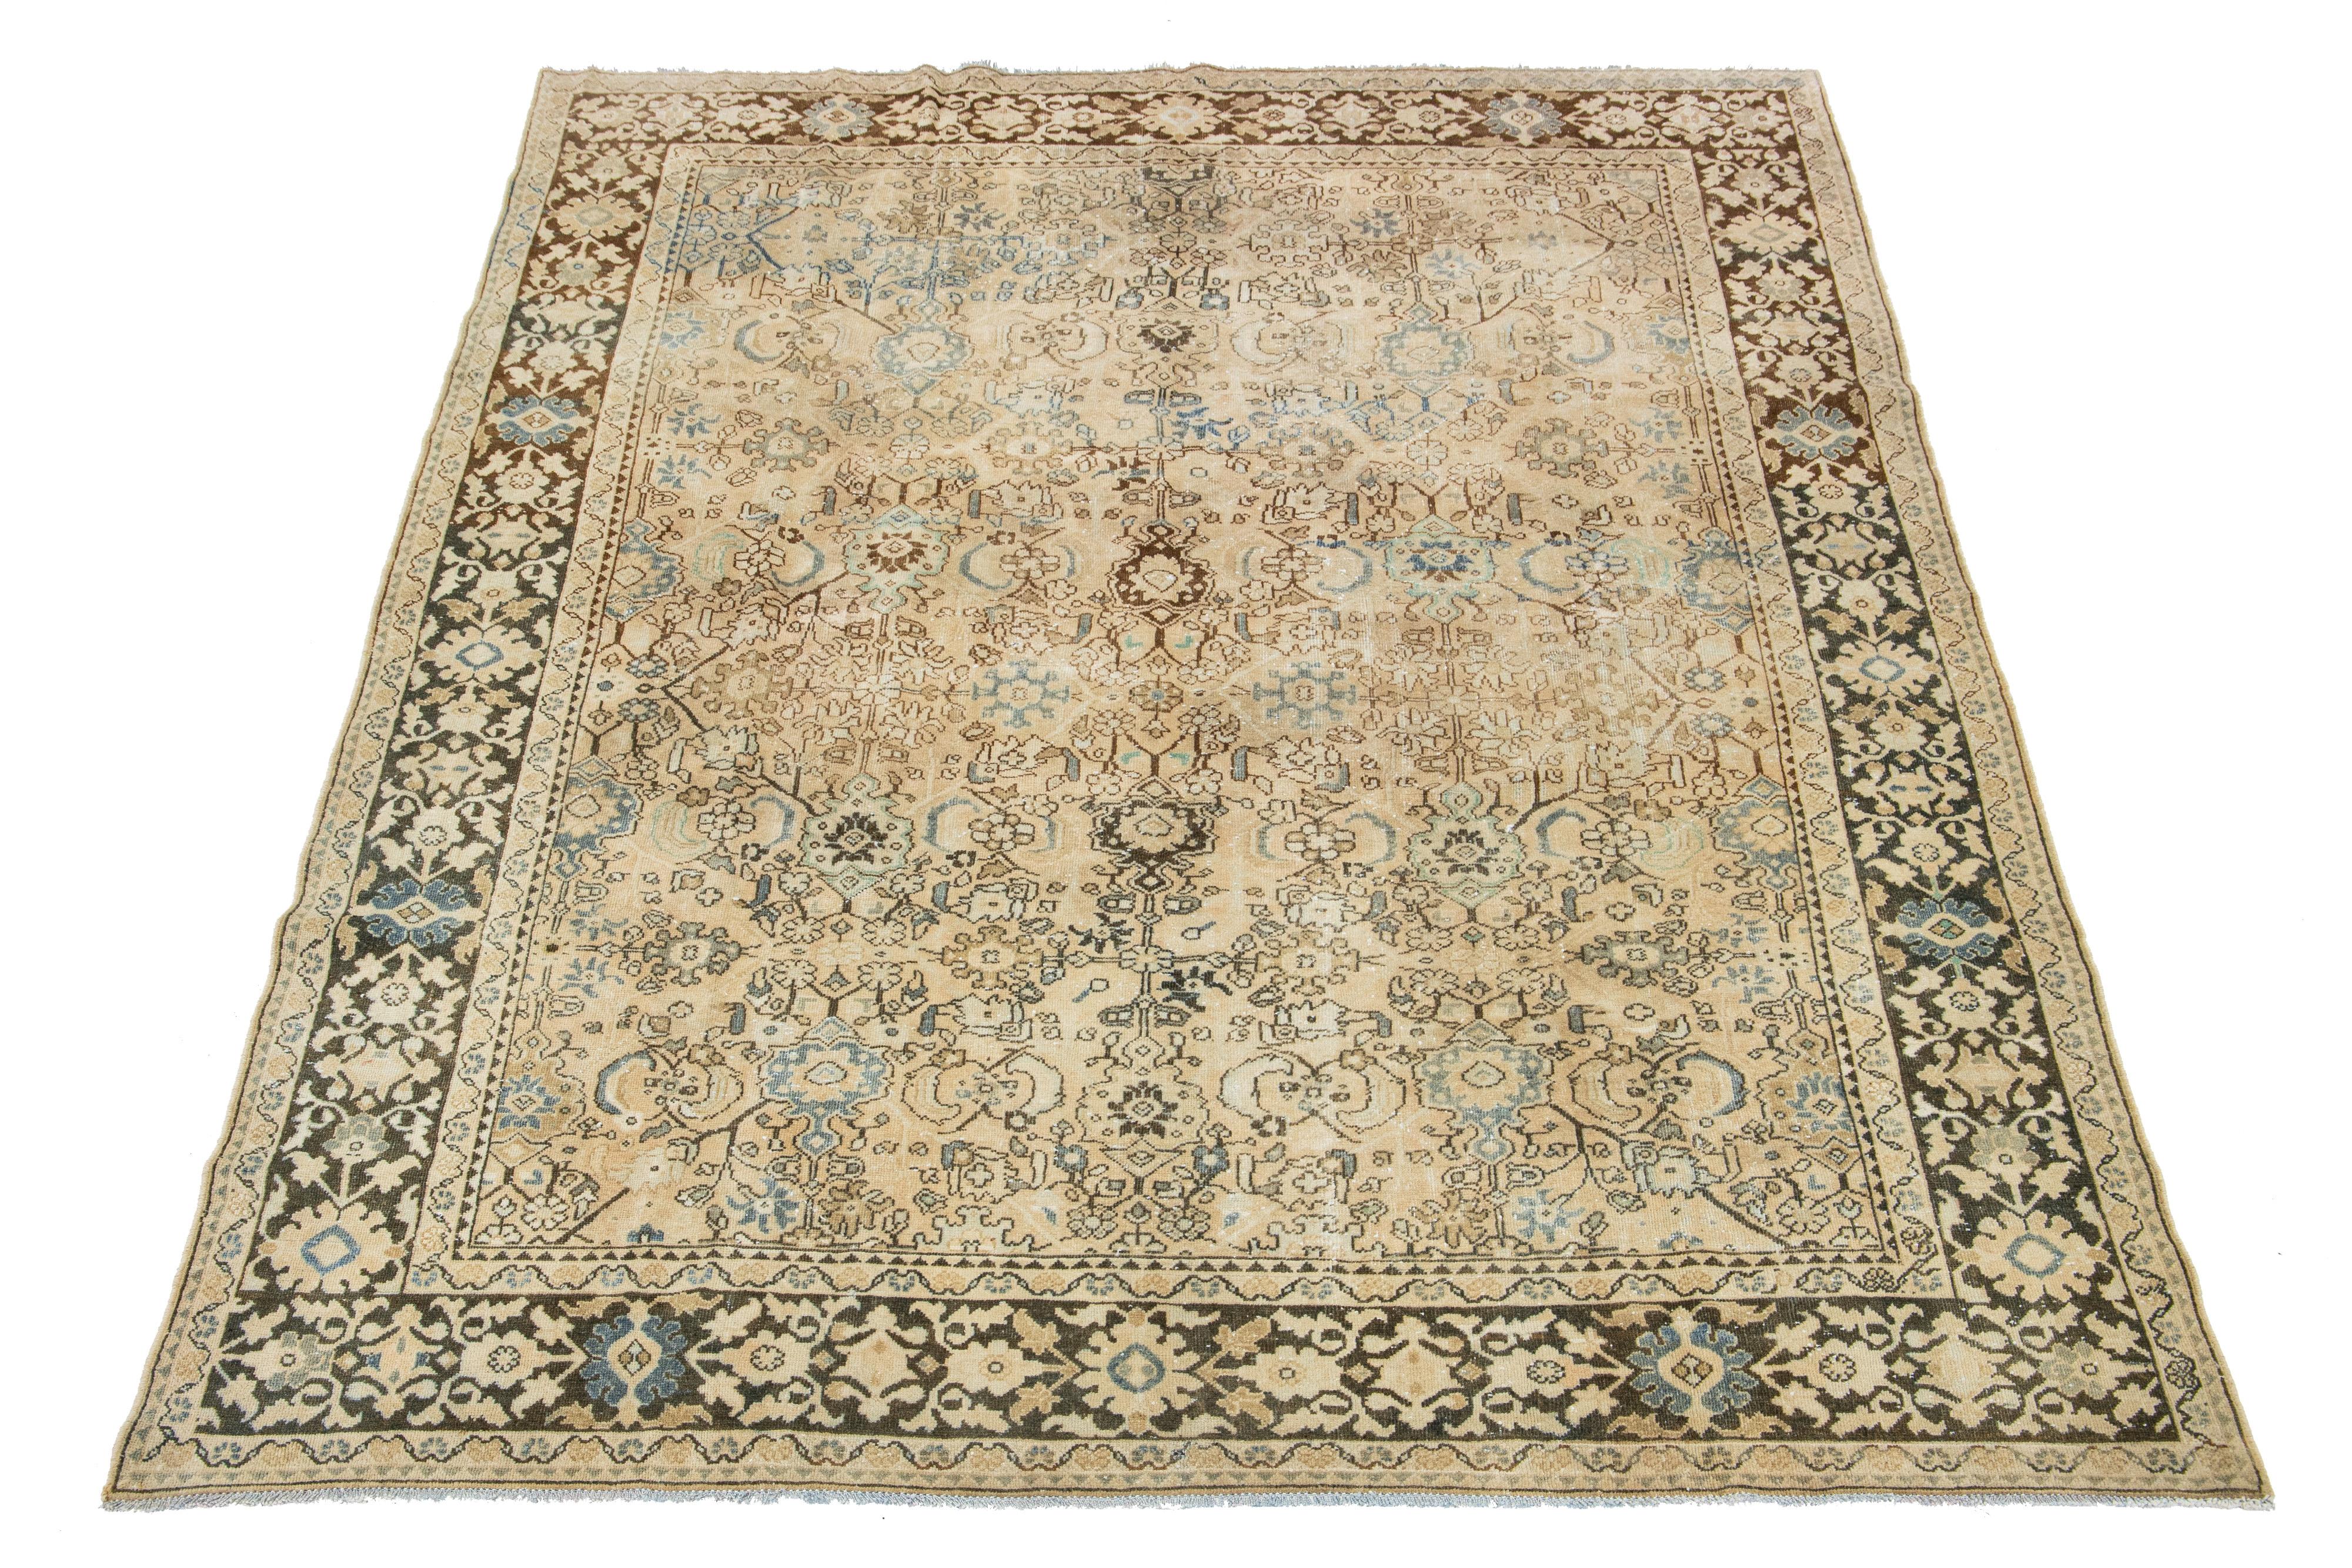 Beautiful Vintage Mahal hand-knotted wool rug with a beige color field. This Persian rug has blue and brown hues throughout the floral motif.

This rug measures 7'9